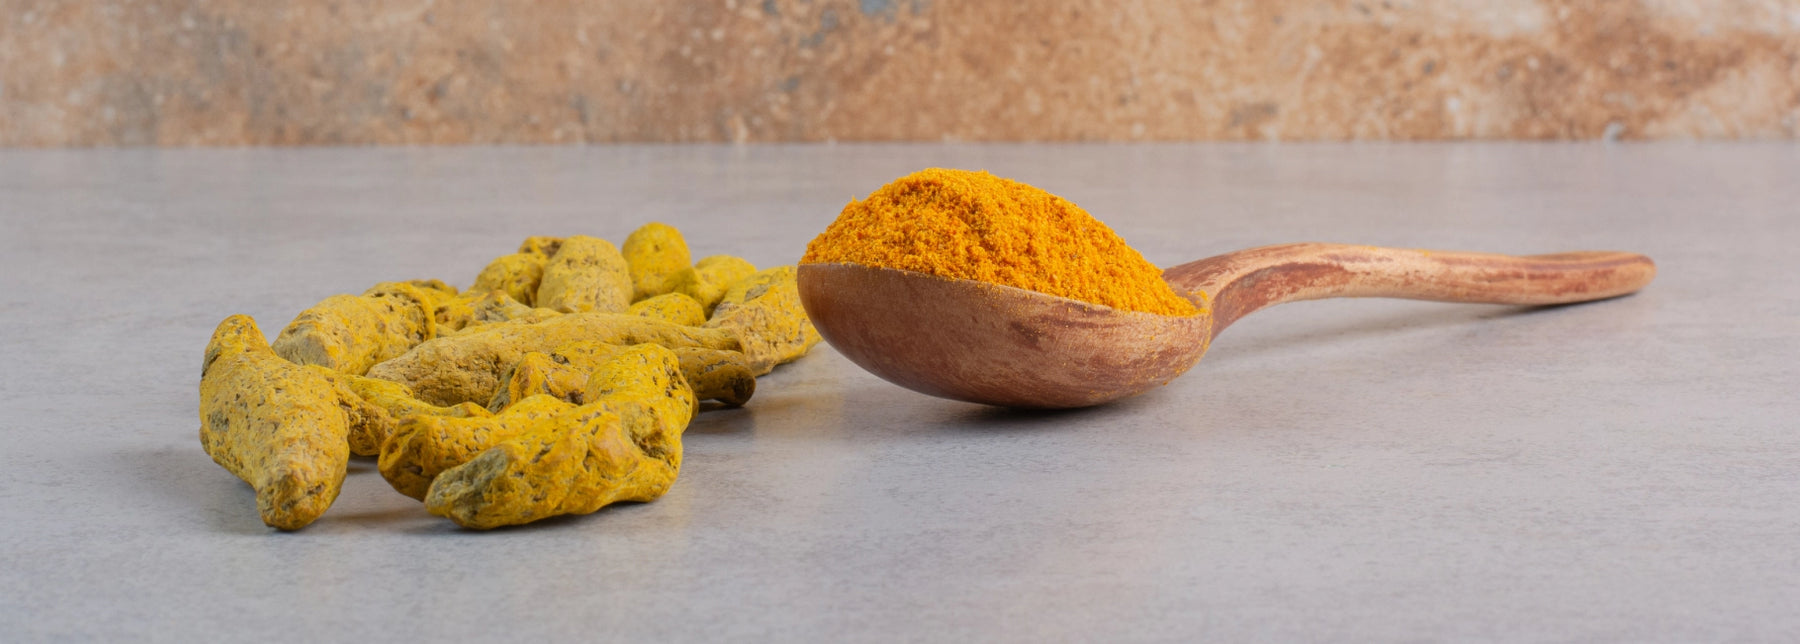 What are the curcumin benefits?